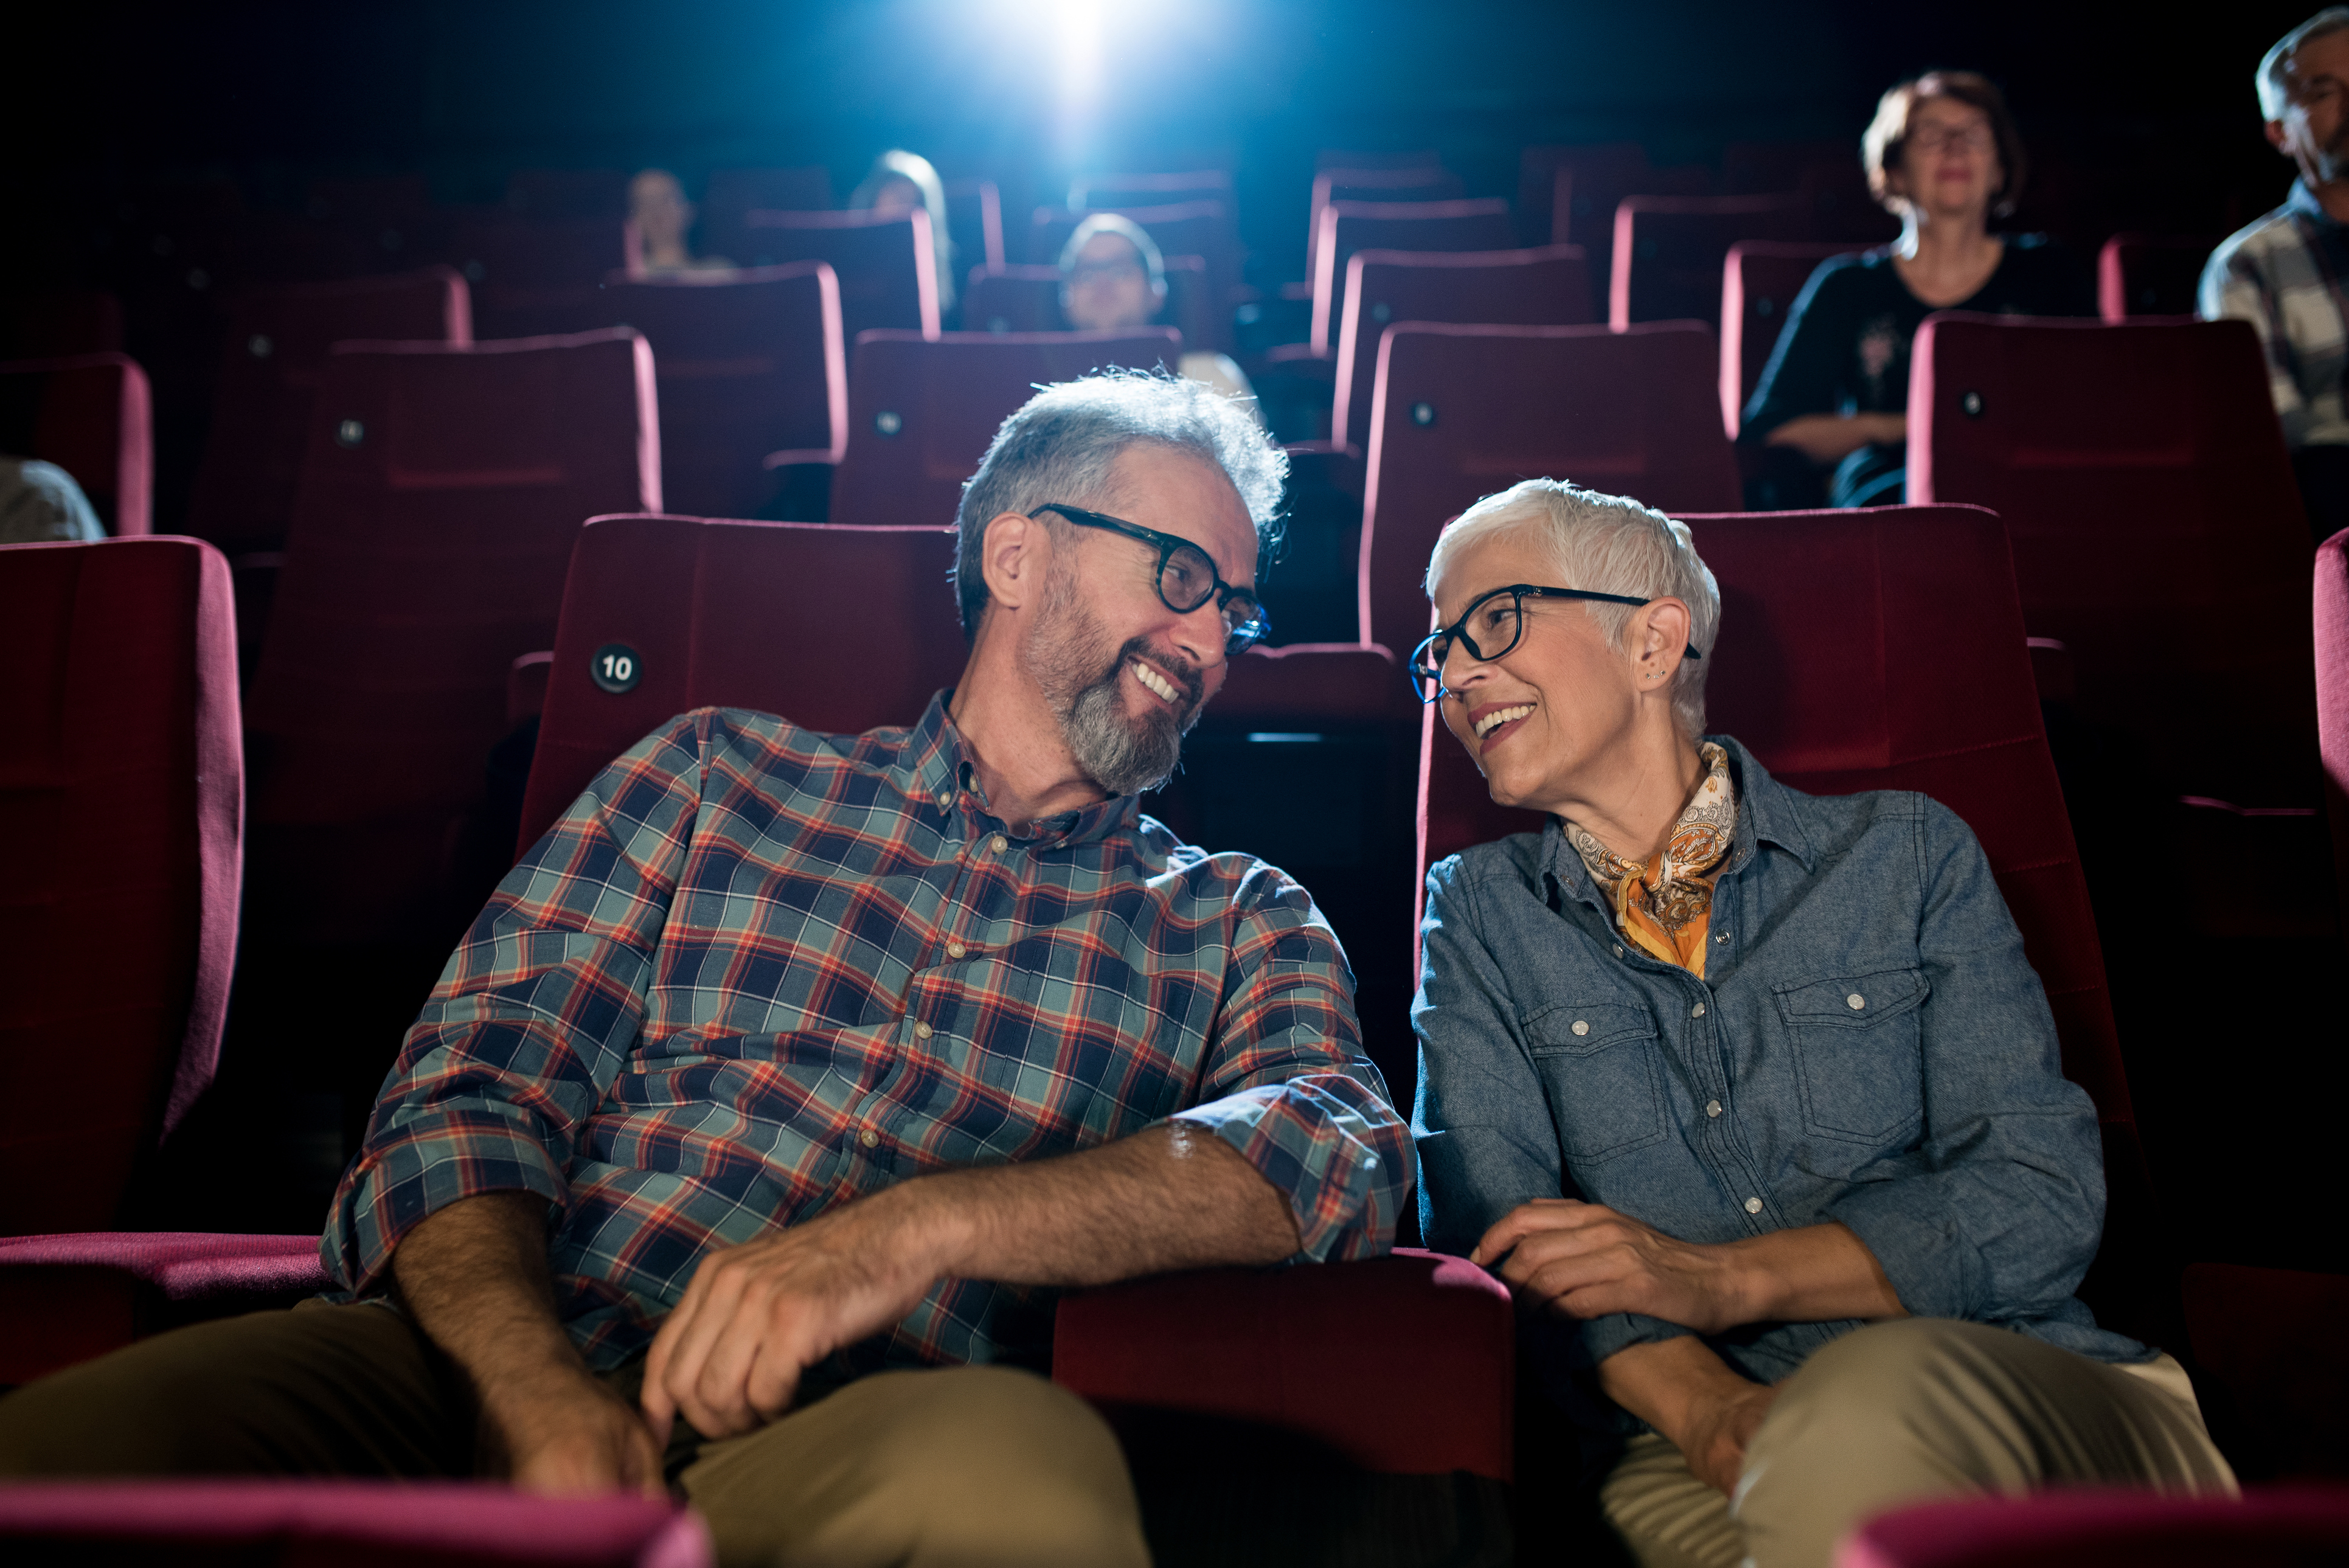 A couple in their sixties sitting on red cinema seats, they are leaning towards each other smiling.